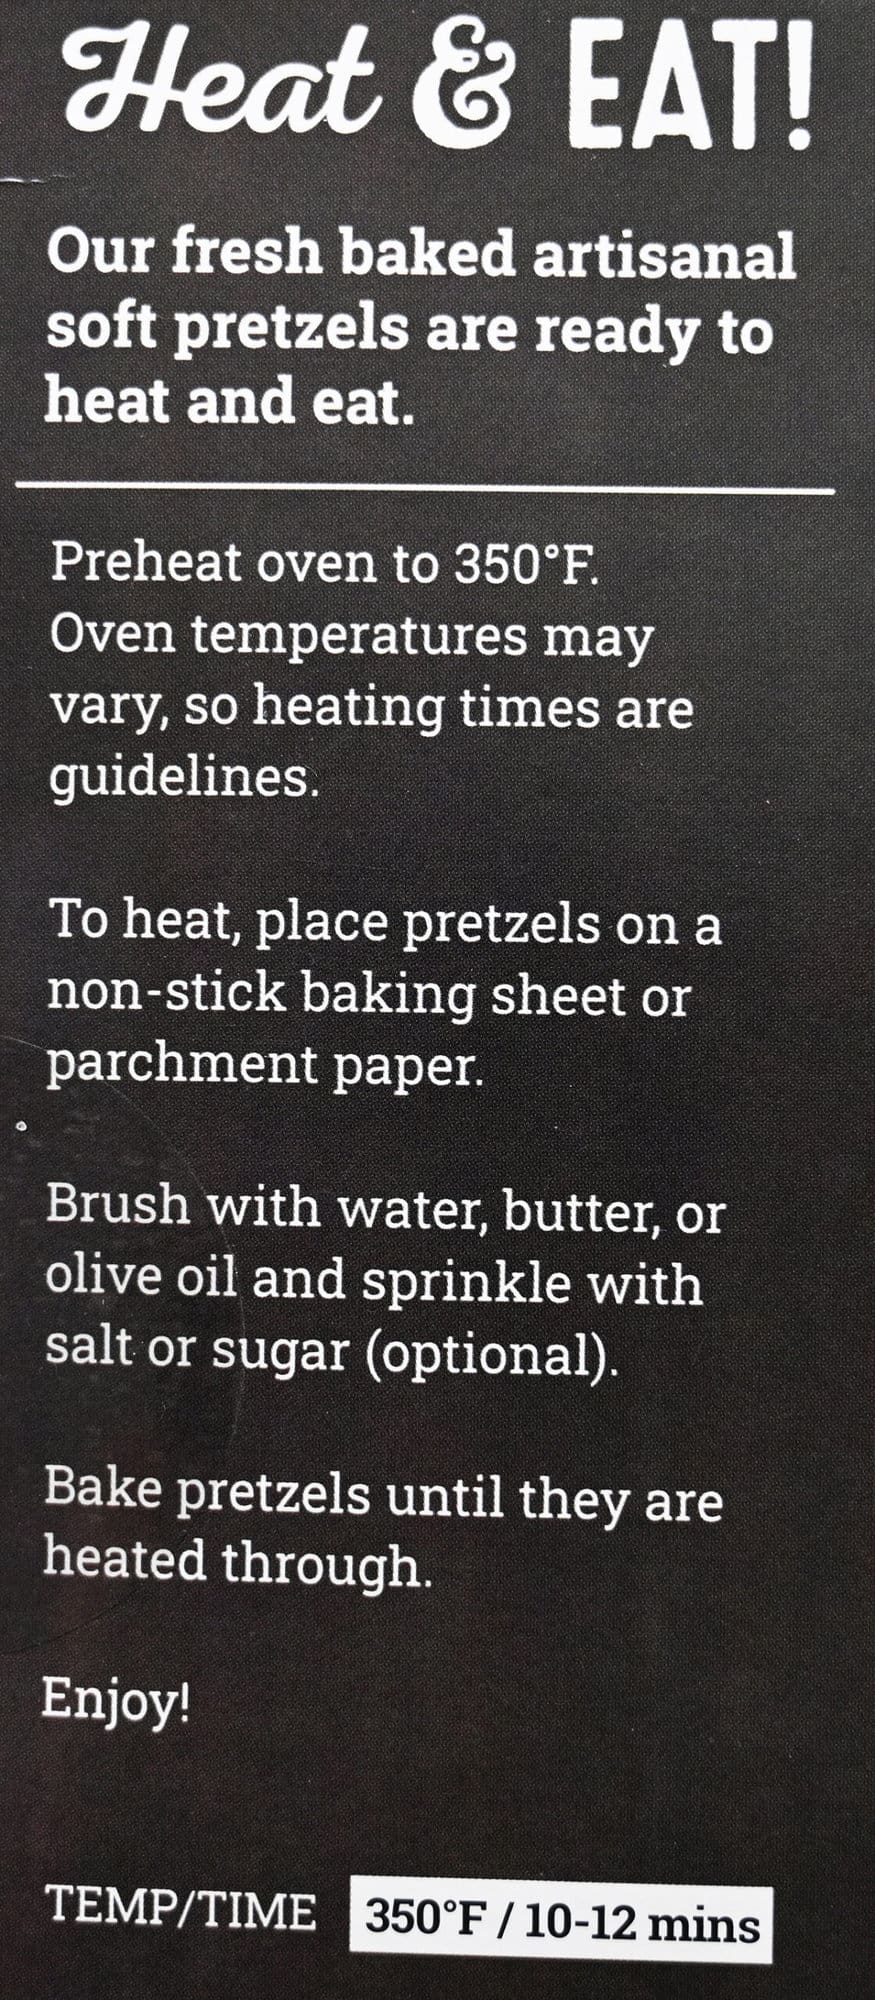 Image of the heating instructions for the pretzels in general from the box.